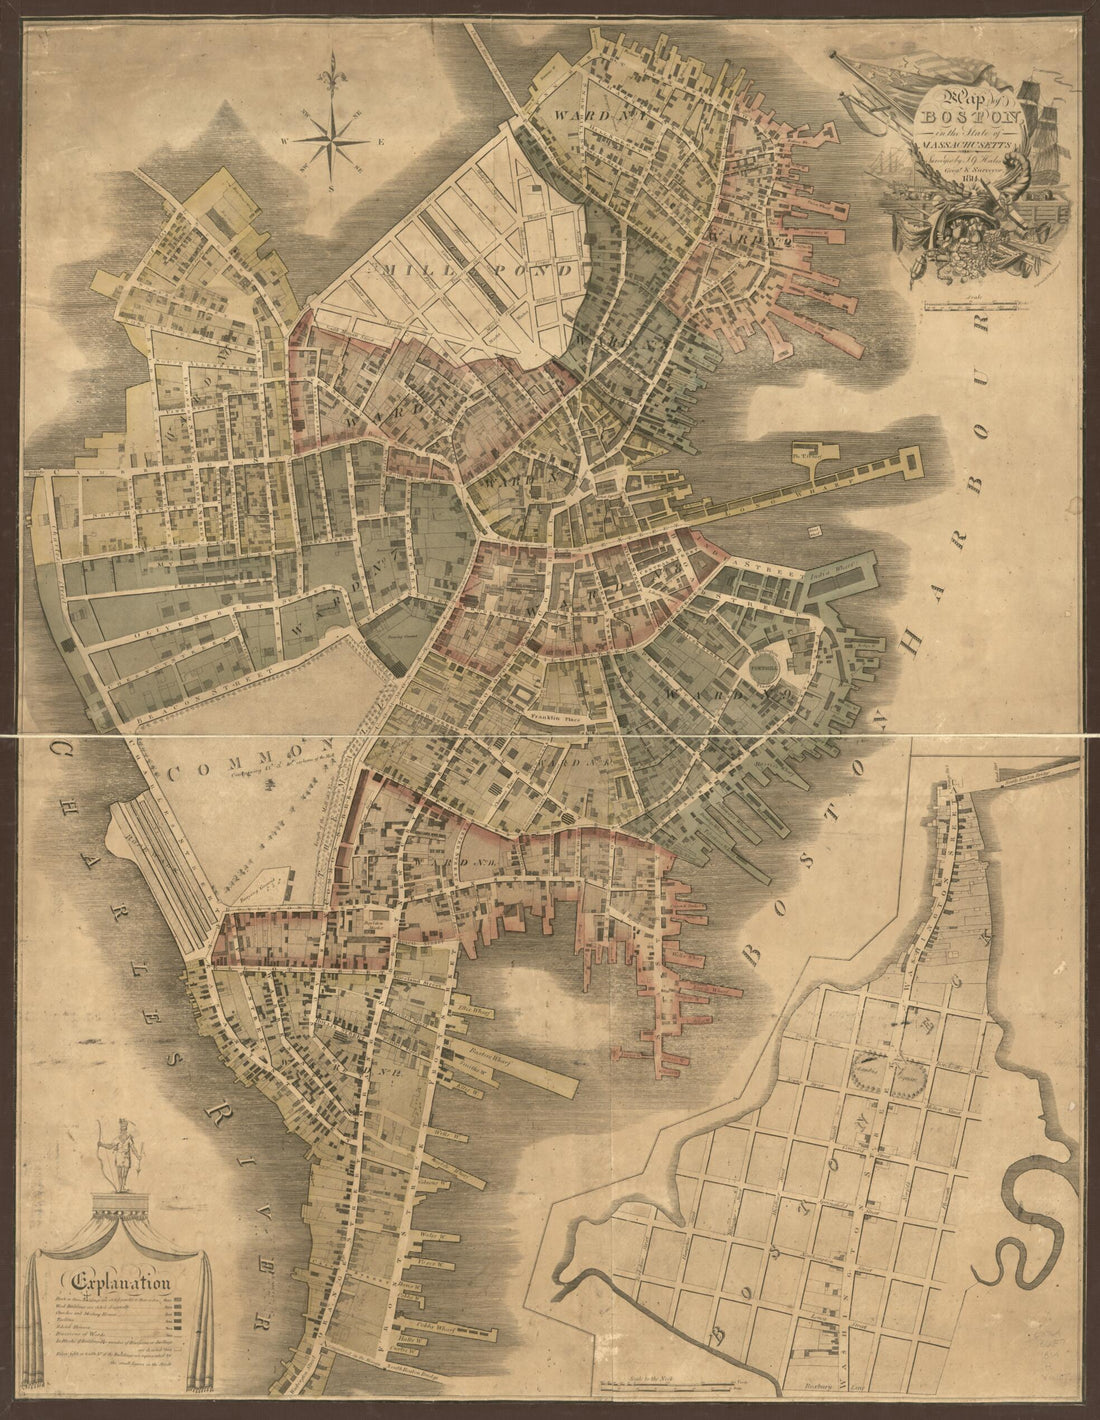 This old map of Map of Boston In the State of Massachusetts : from 1814 was created by John Groves Hales, Thomas Wightman in 1814